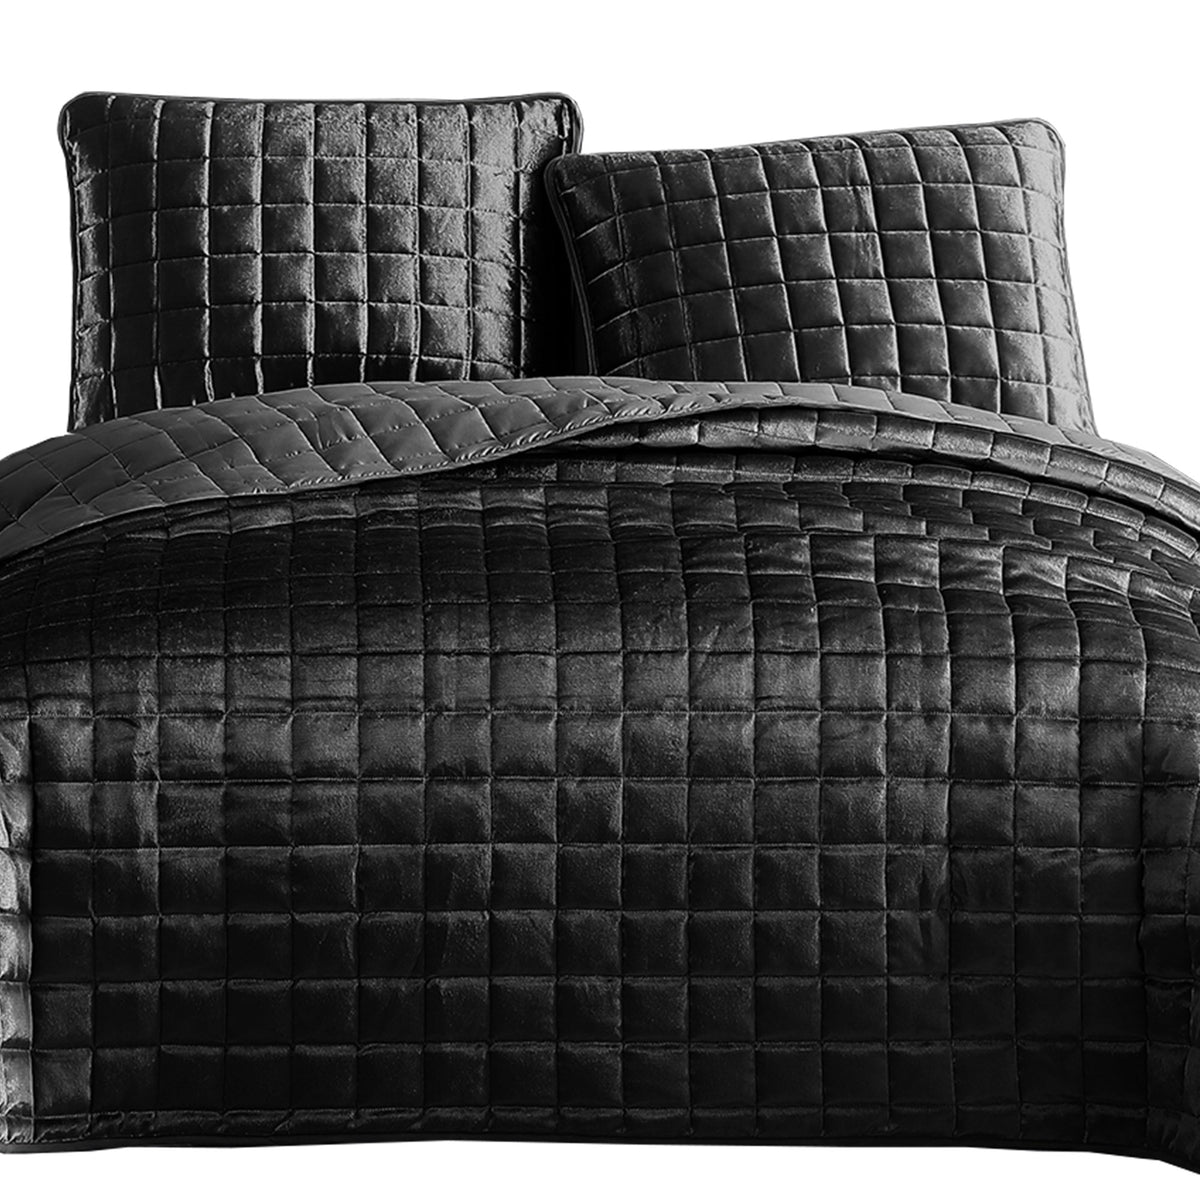 3 Piece King Size Coverlet Set with Stitched Square Pattern, Dark Gray - BM225237